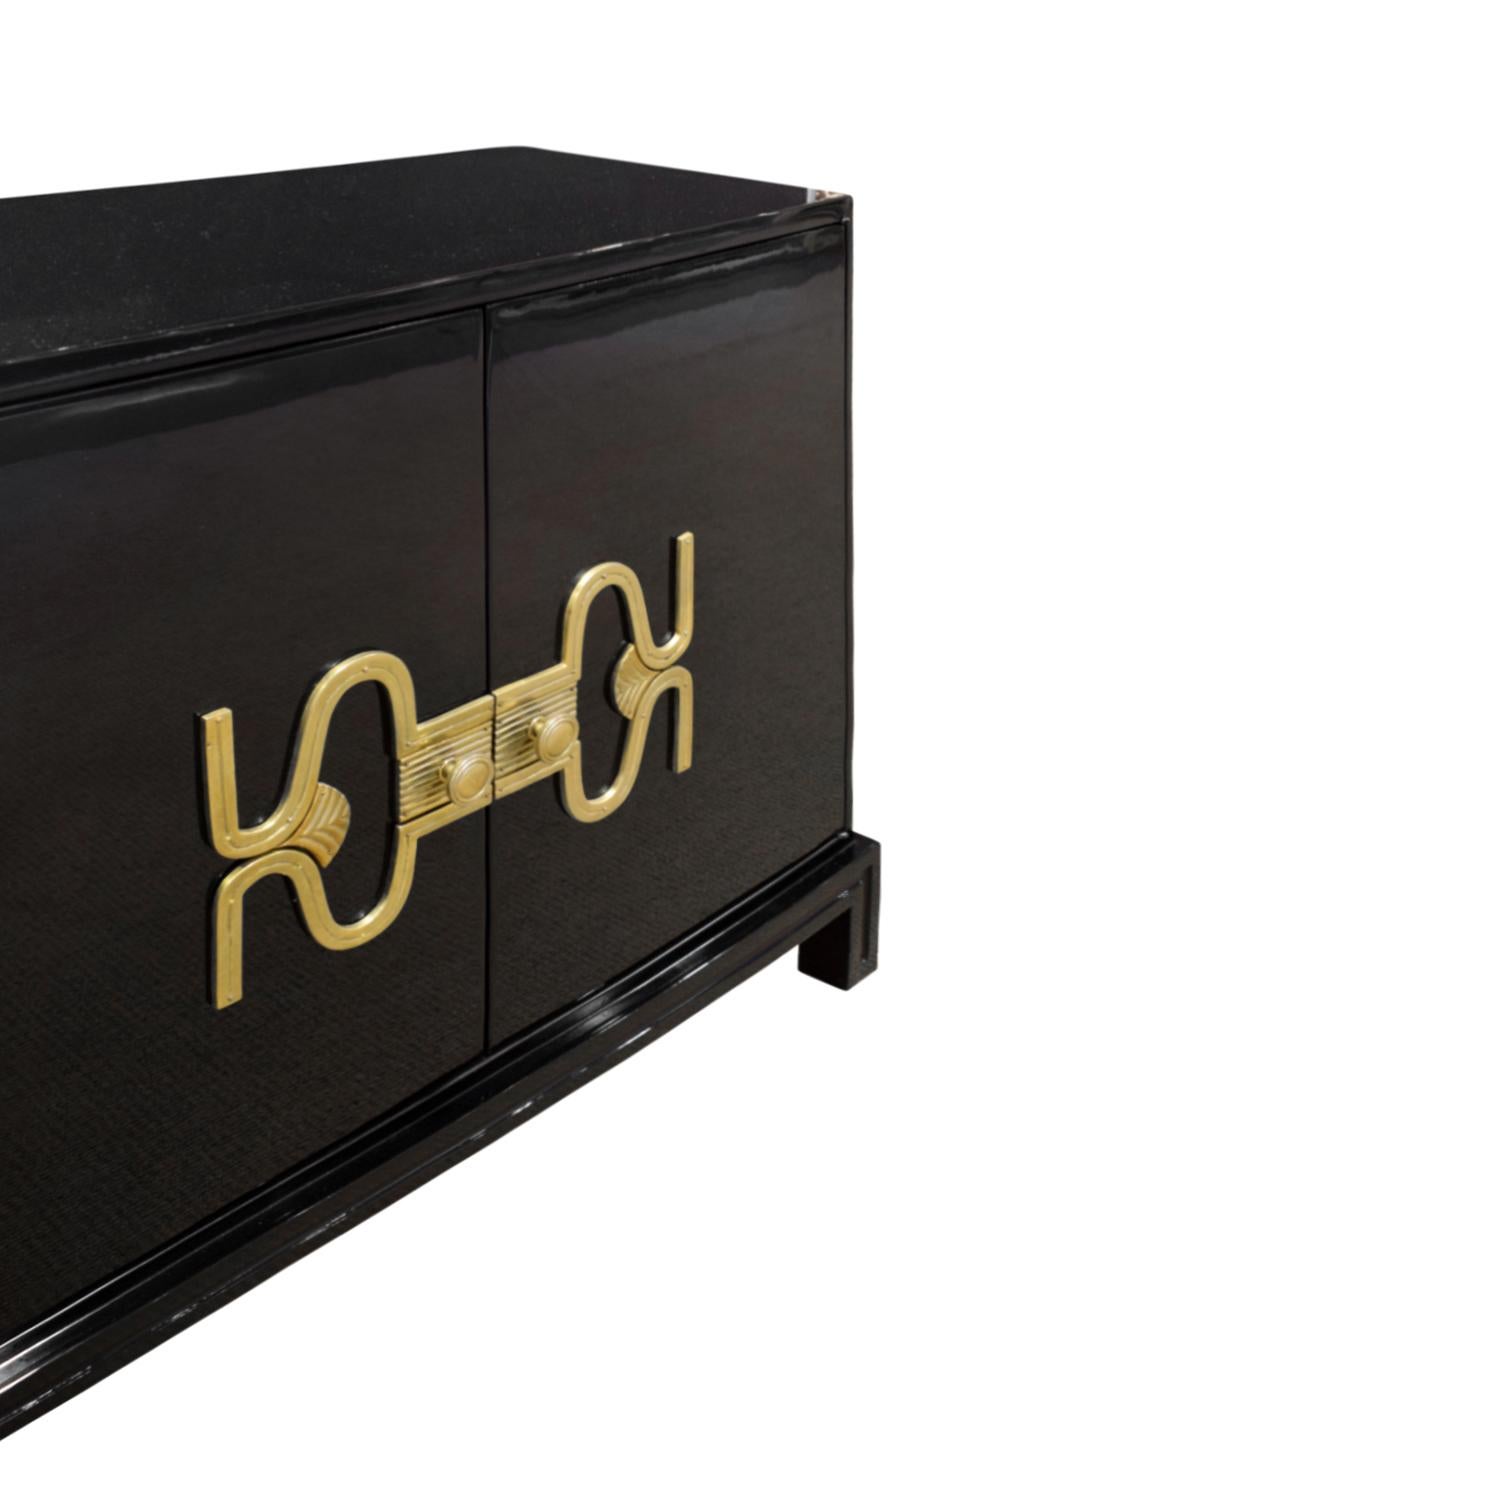 Tommi Parzinger Rare Black Lacquered Credenza with Brass Hardware, 1960s (amerikanisch)